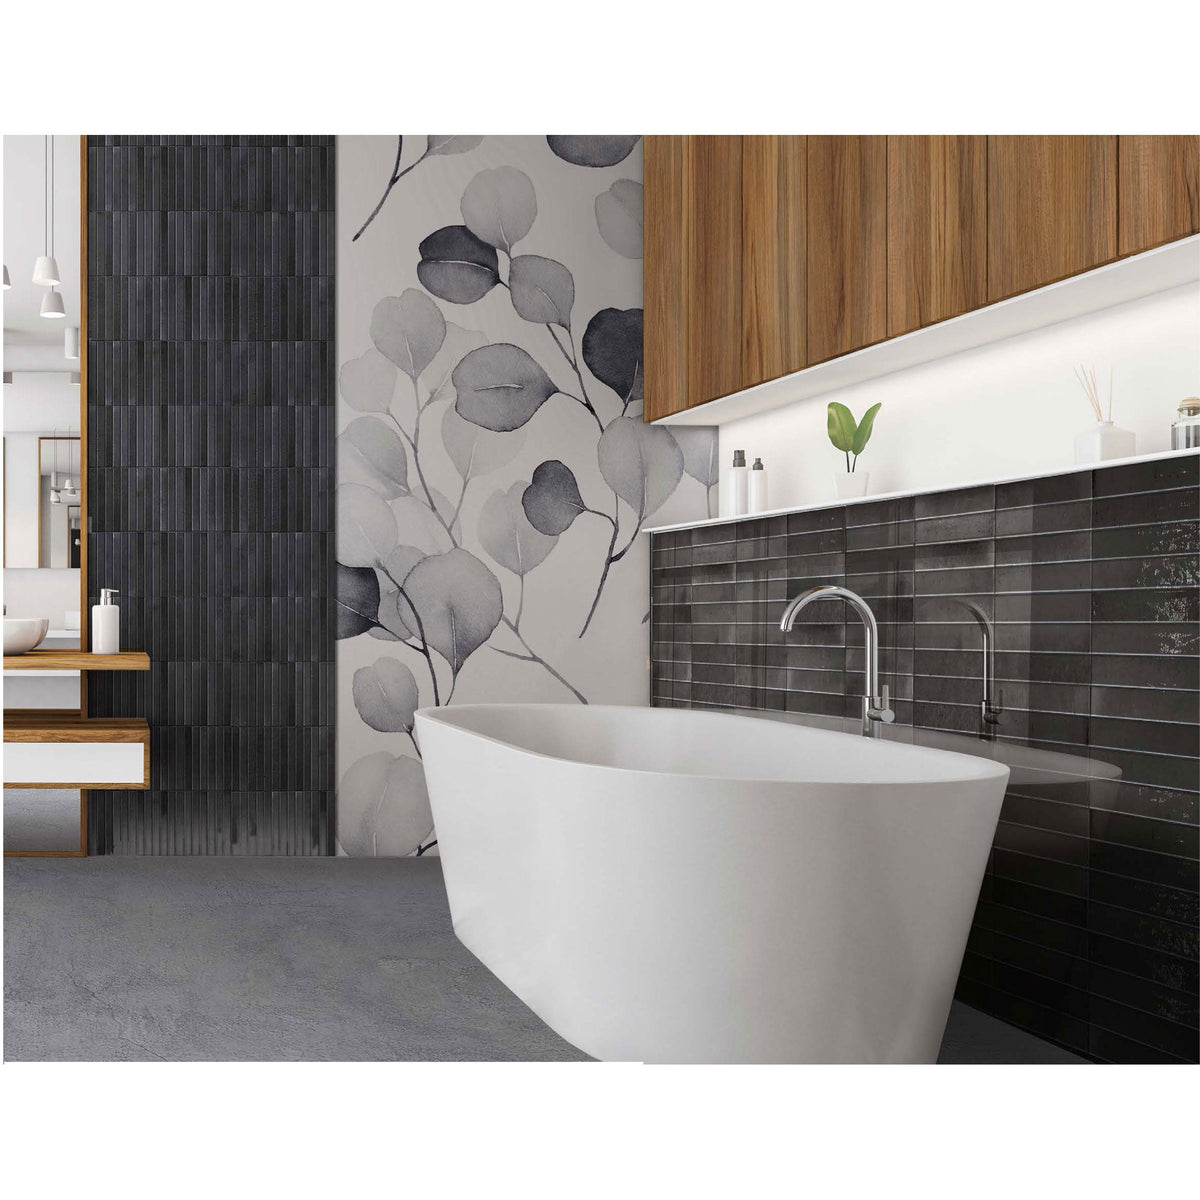 Cobsa - Homey Series 5 in. x 10 in. Porcelain Subway Tile - Licorice Installed